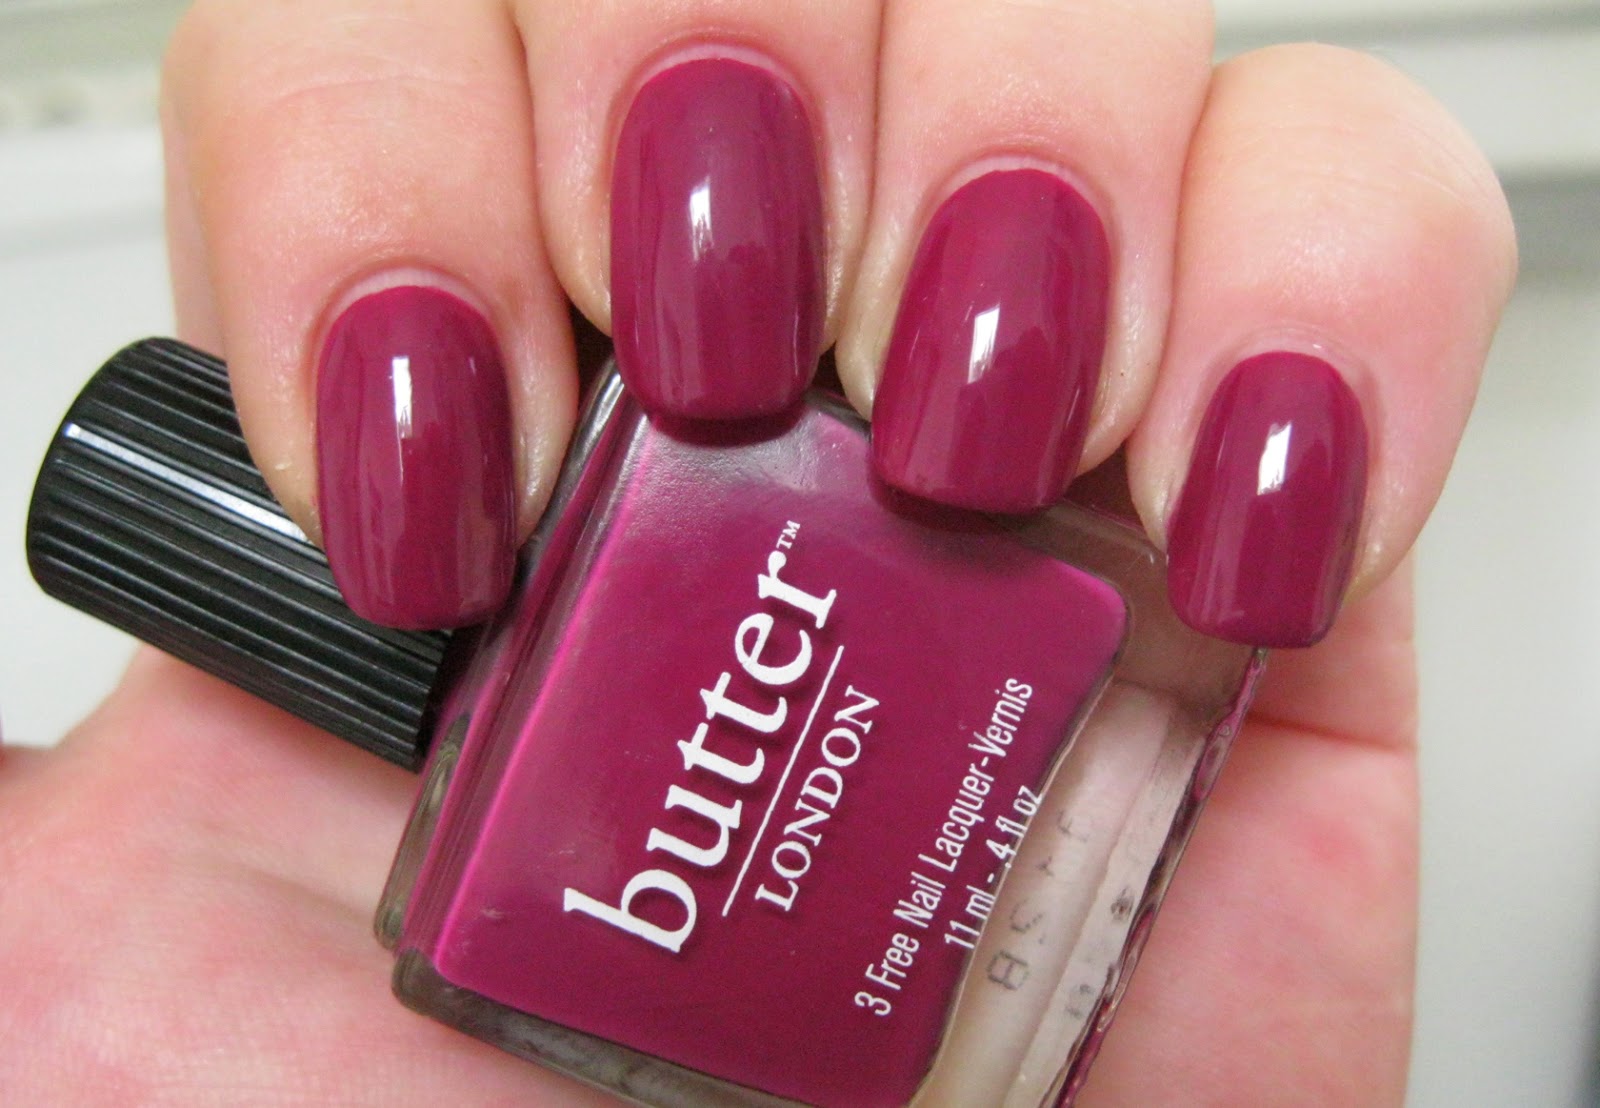 3. Butter London Nail Lacquer in "Queen Vic" - wide 4